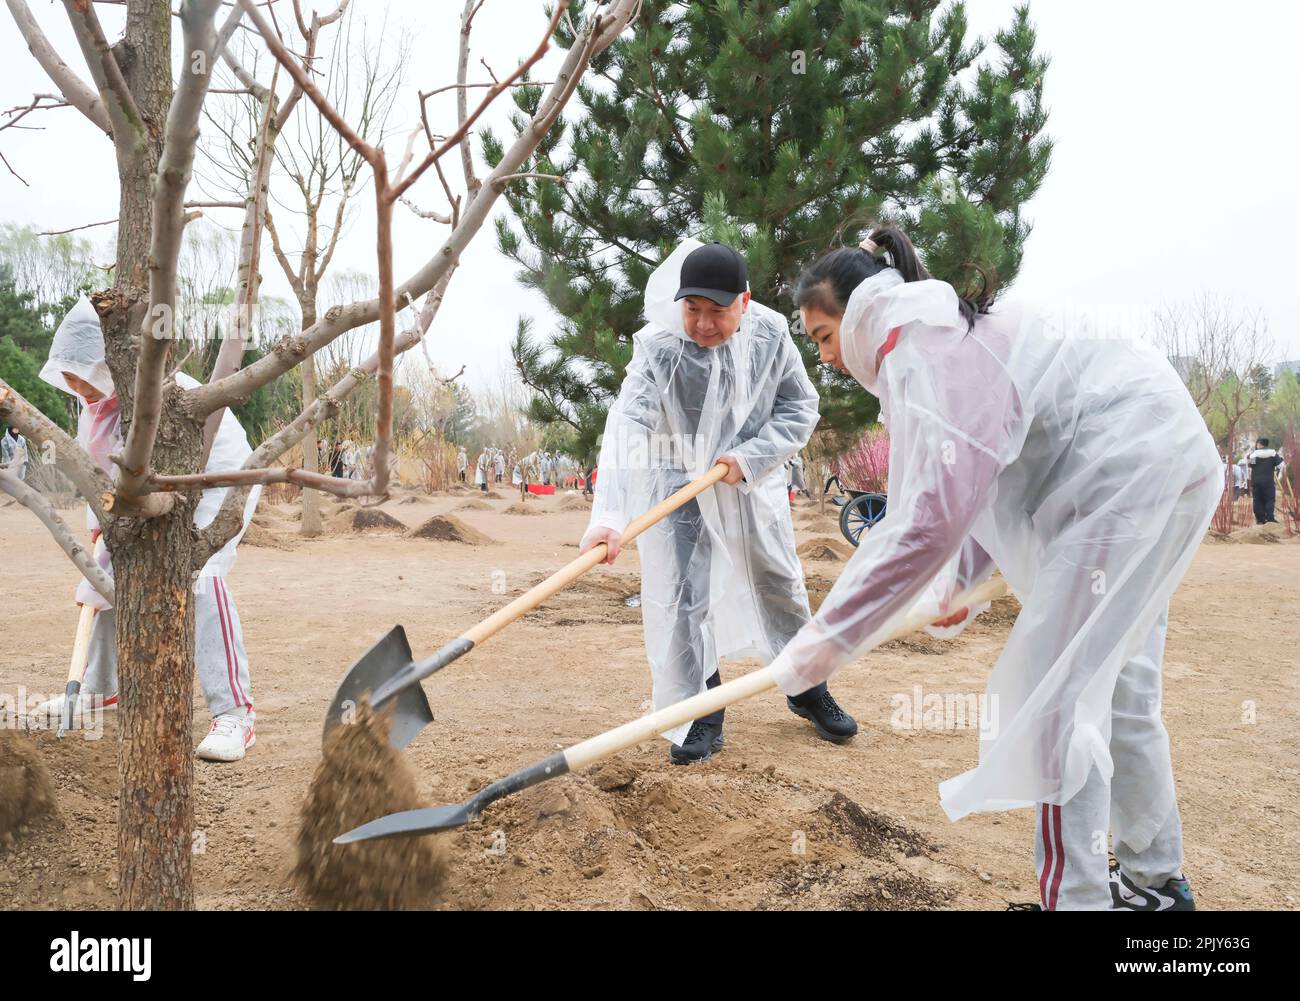 Beijing, China. 4th Apr, 2023. Li Xi plants a tree during a voluntary tree planting activity in Chaoyang District in Beijing, capital of China, April 4, 2023. Party and state leaders Xi Jinping, Li Qiang, Zhao Leji, Wang Huning, Cai Qi, Ding Xuexiang, Li Xi, and Han Zheng, planted trees with local people at a city park in the eastern district of Chaoyang in the spring shower. Credit: Ding Lin/Xinhua/Alamy Live News Stock Photo